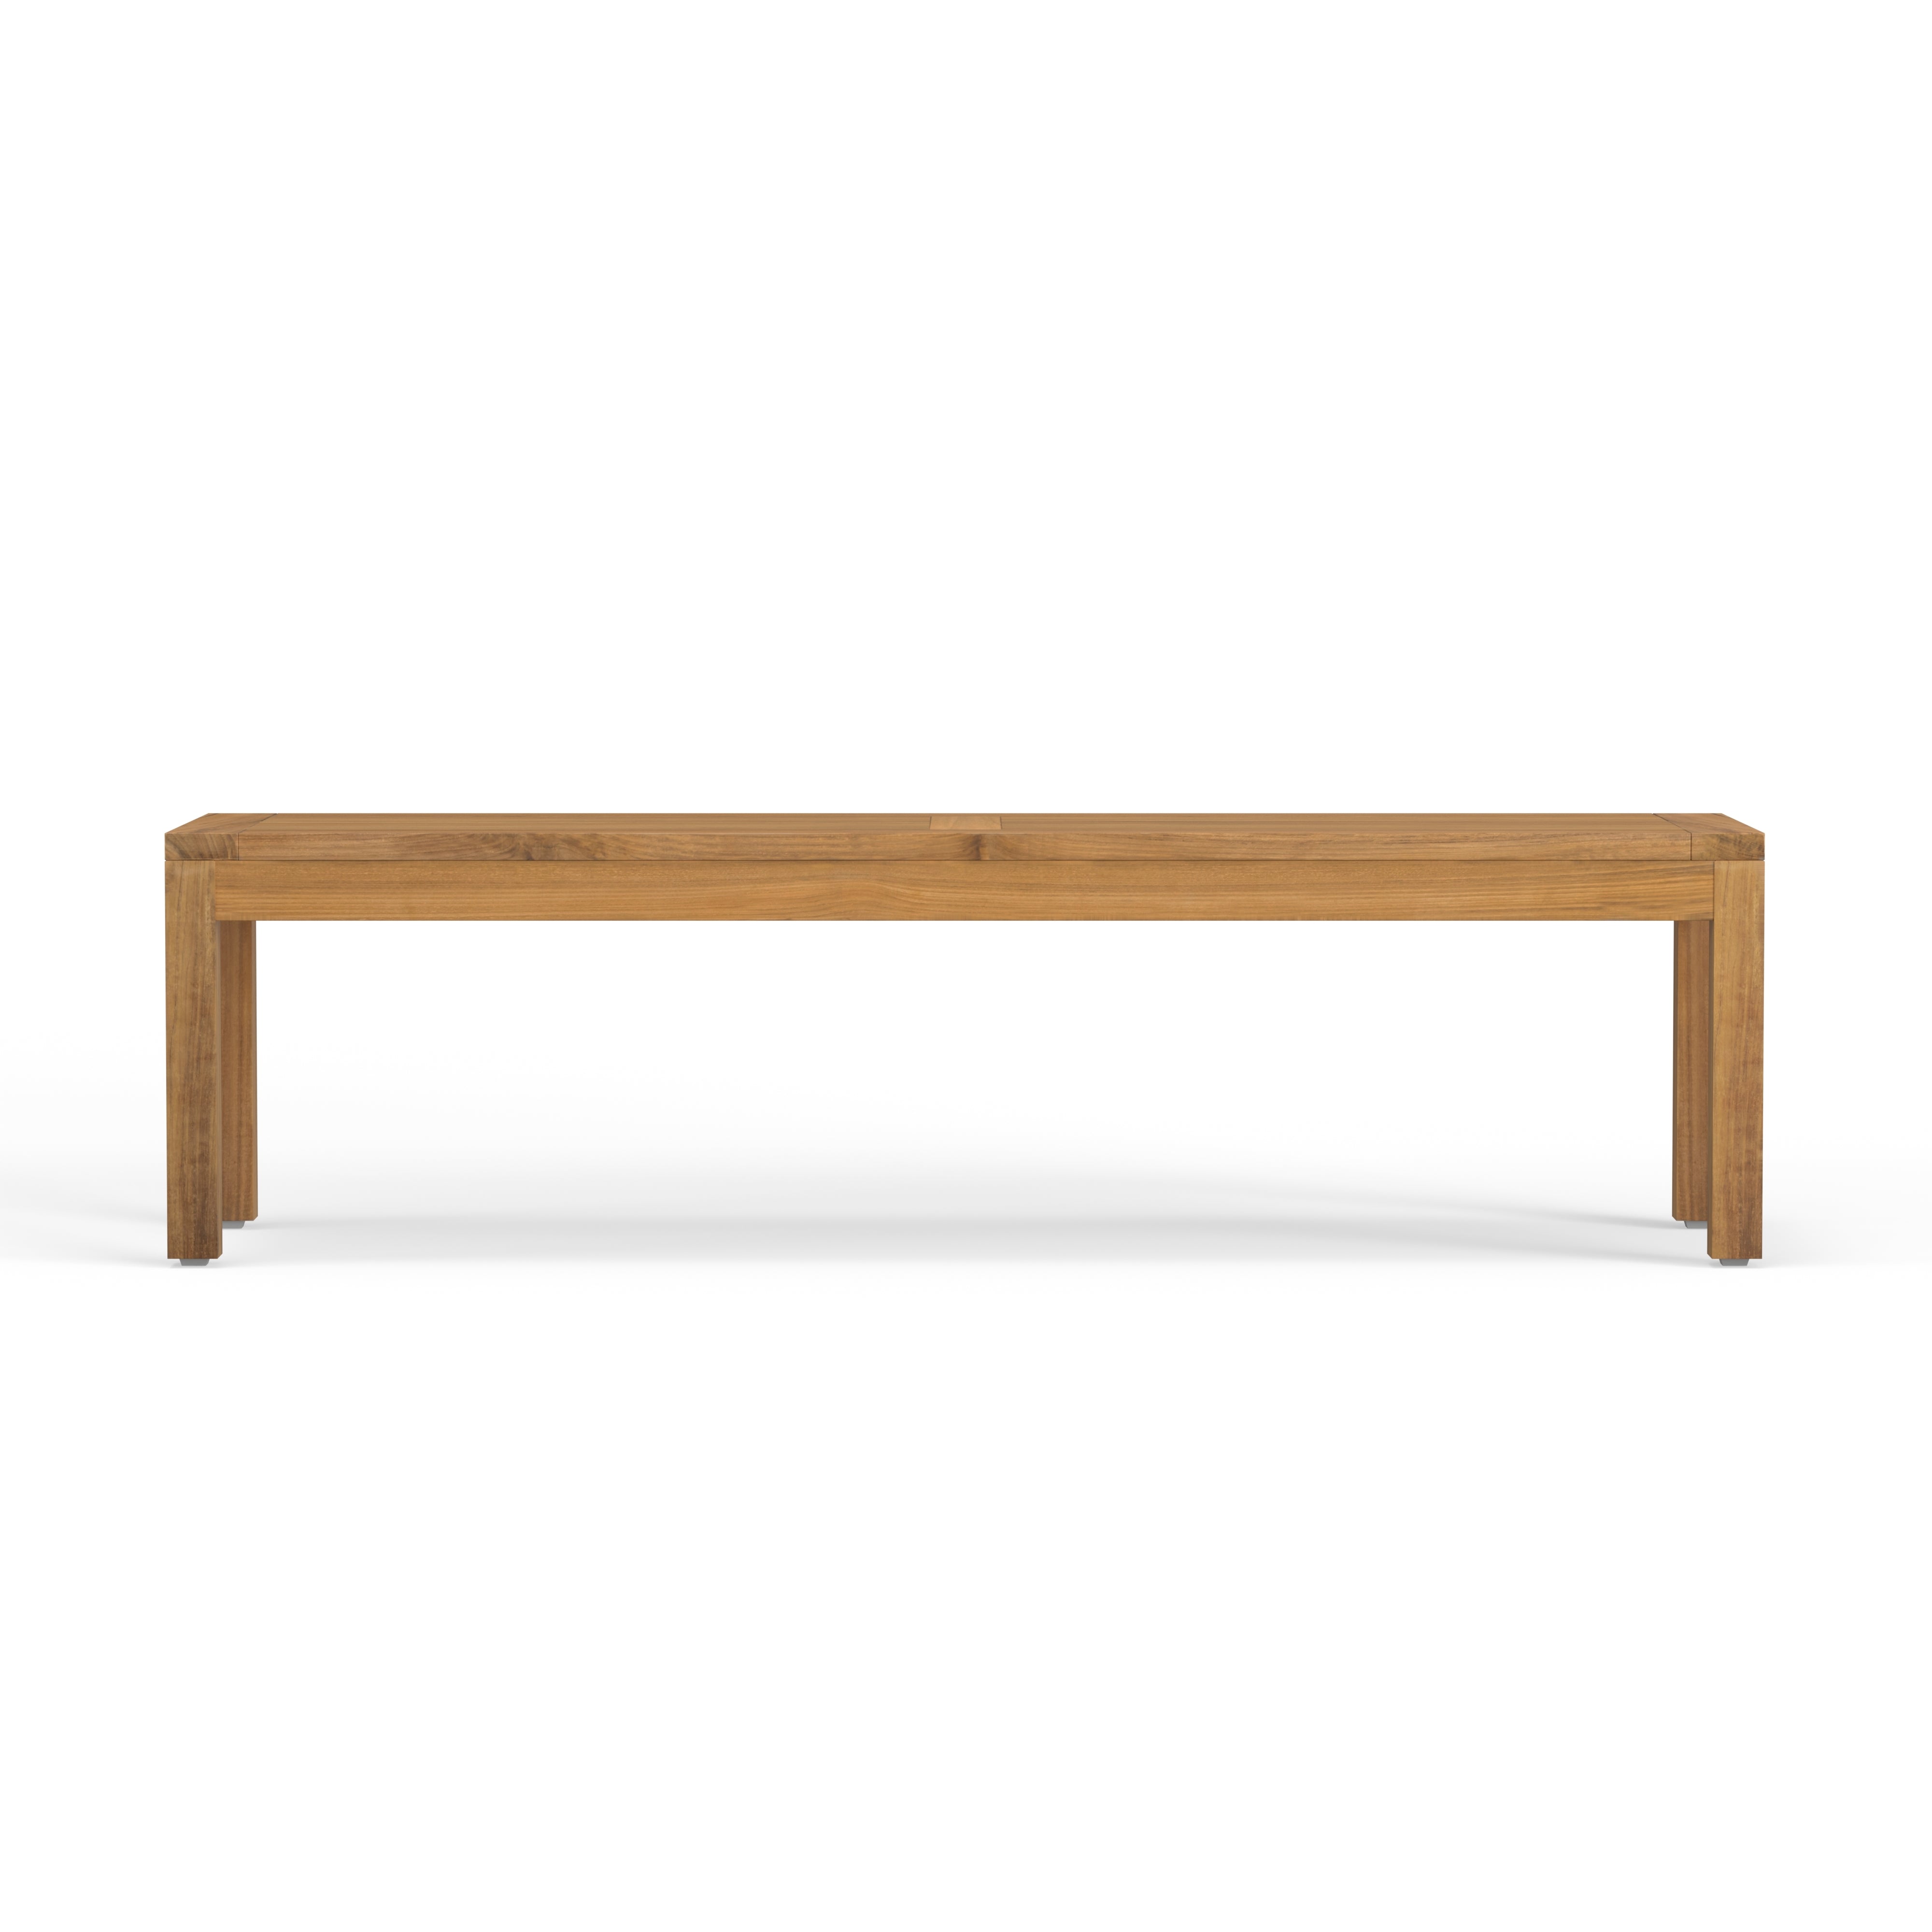 Most Comfortable Luxury Handcrafted Outdoor Teak Seating Bench